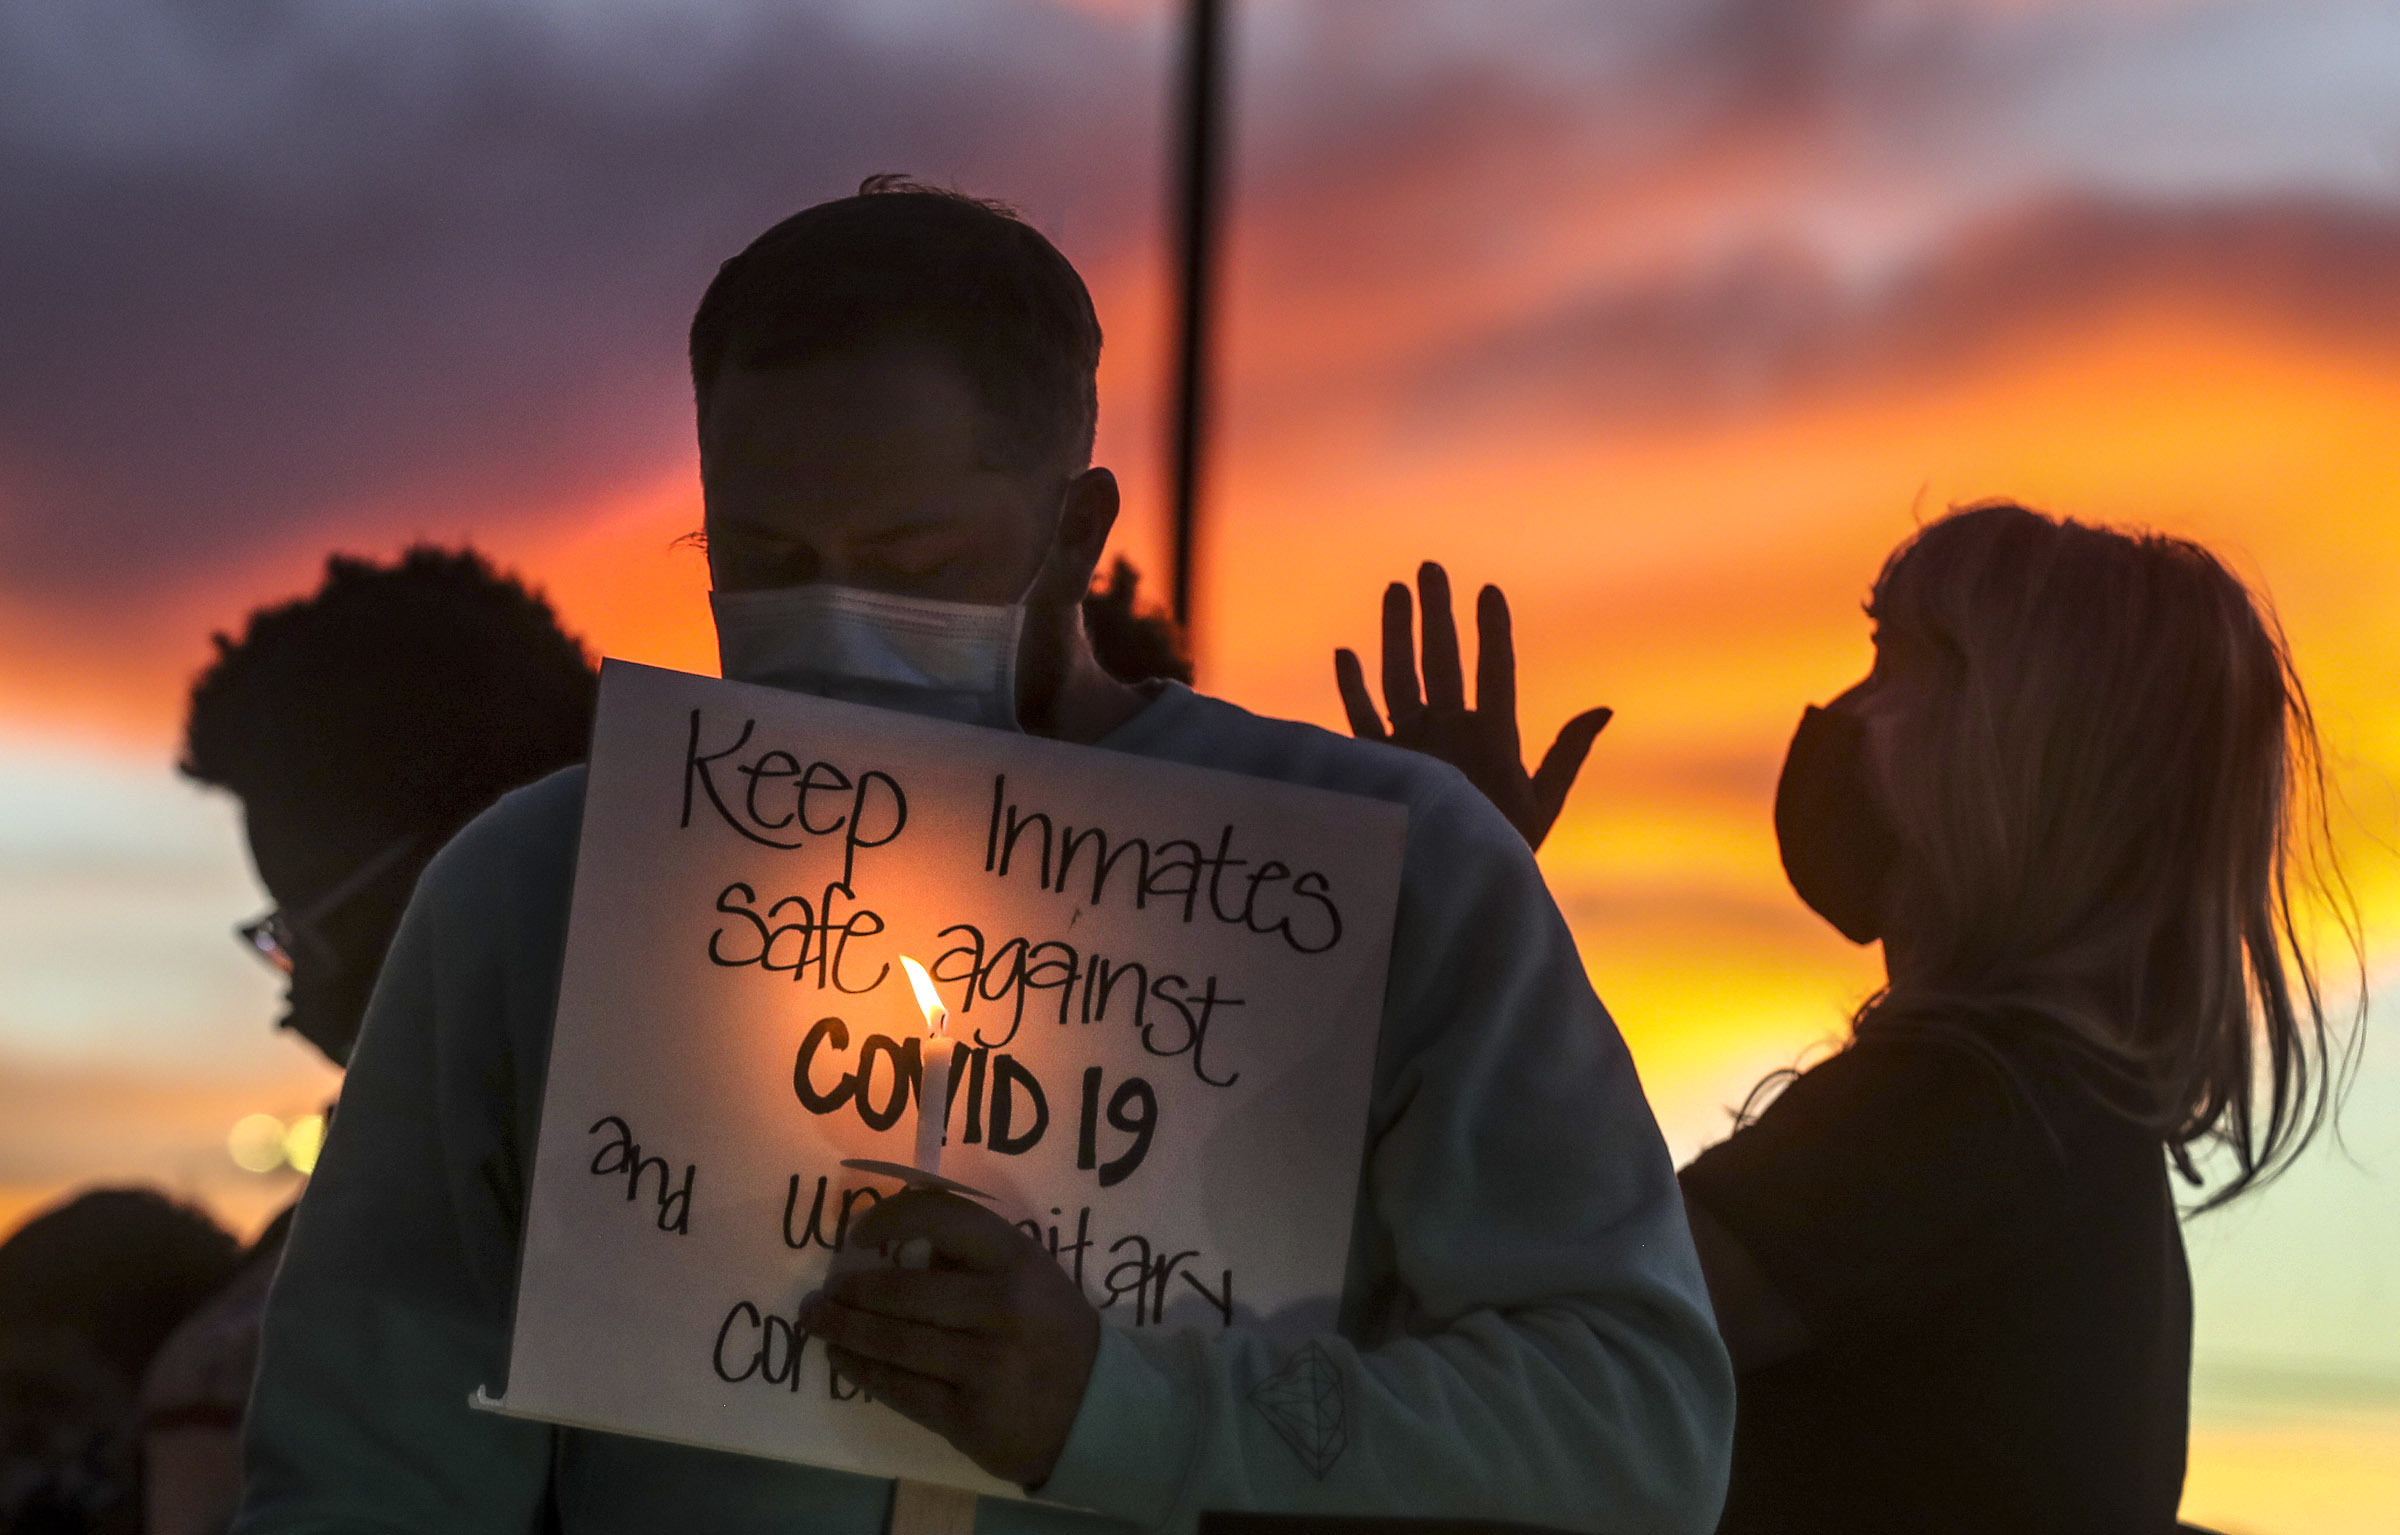 FILE - In this Oct. 13, 2020, file photo, family members of inmates incarcerated in the Utah Department of Corrections' prison system hold candles and say a prayer following a rally outside the Department of Corrections office in Draper, Utah. One in five state and federal prisoners in the United States has tested positive for the coronavirus, a rate more than four times higher than the general population. In some states, more than half of prisoners have been infected, according to data collected by The Associated Press and The Marshall Project. (Steve Griffin/The Deseret News via AP, File)